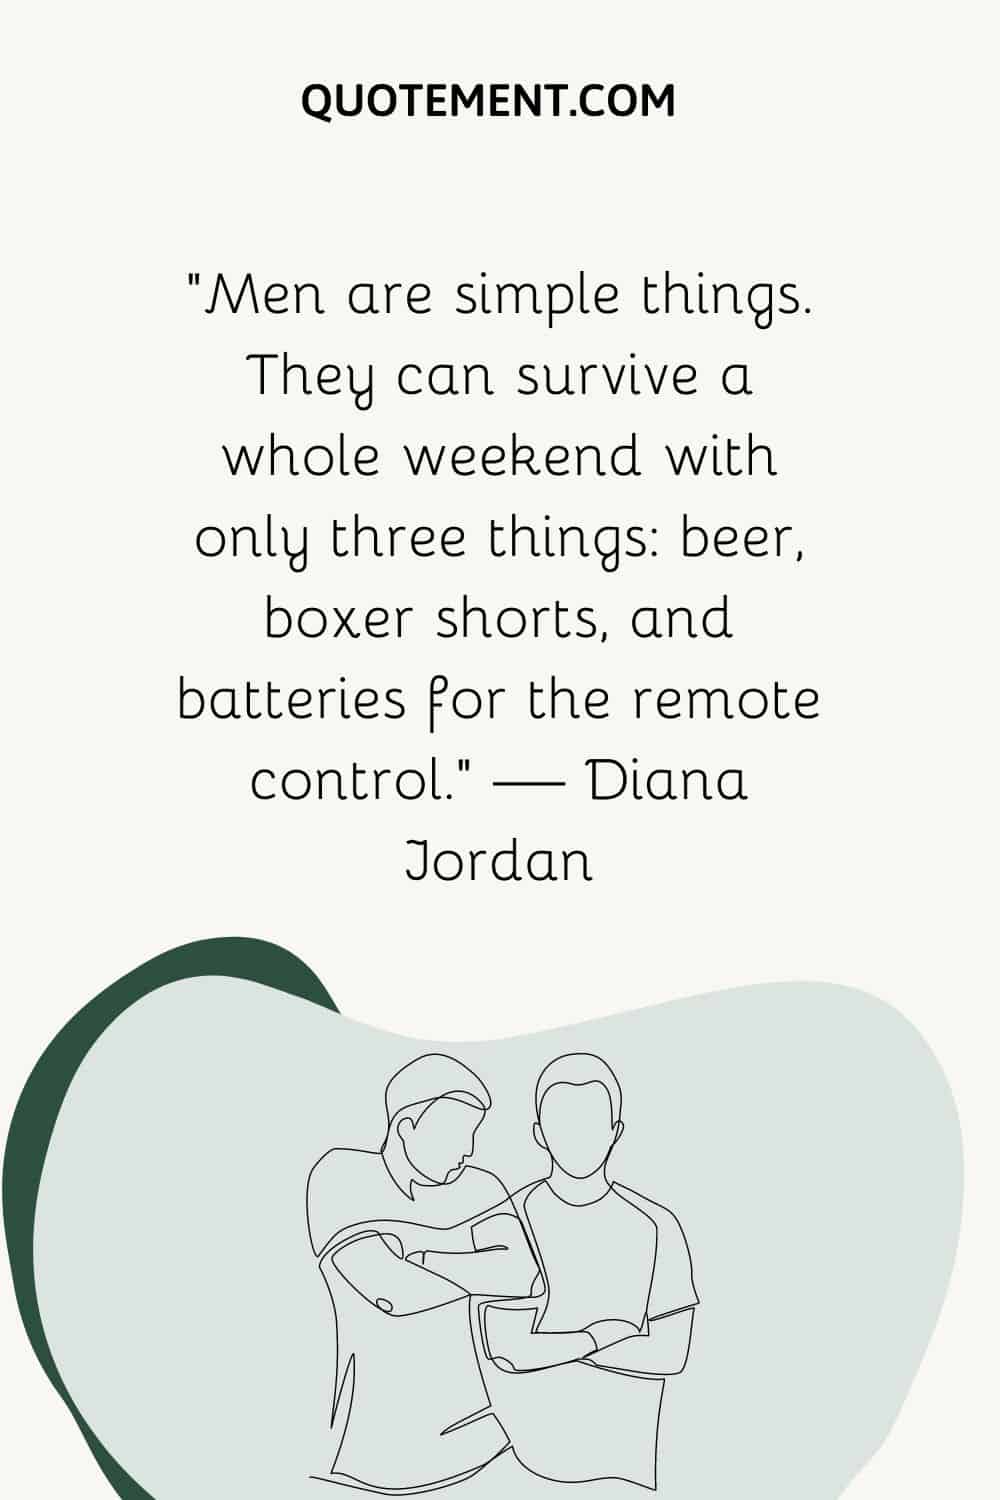 “Men are simple things. They can survive a whole weekend with only three things beer, boxer shorts, and batteries for the remote control.” — Diana Jordan